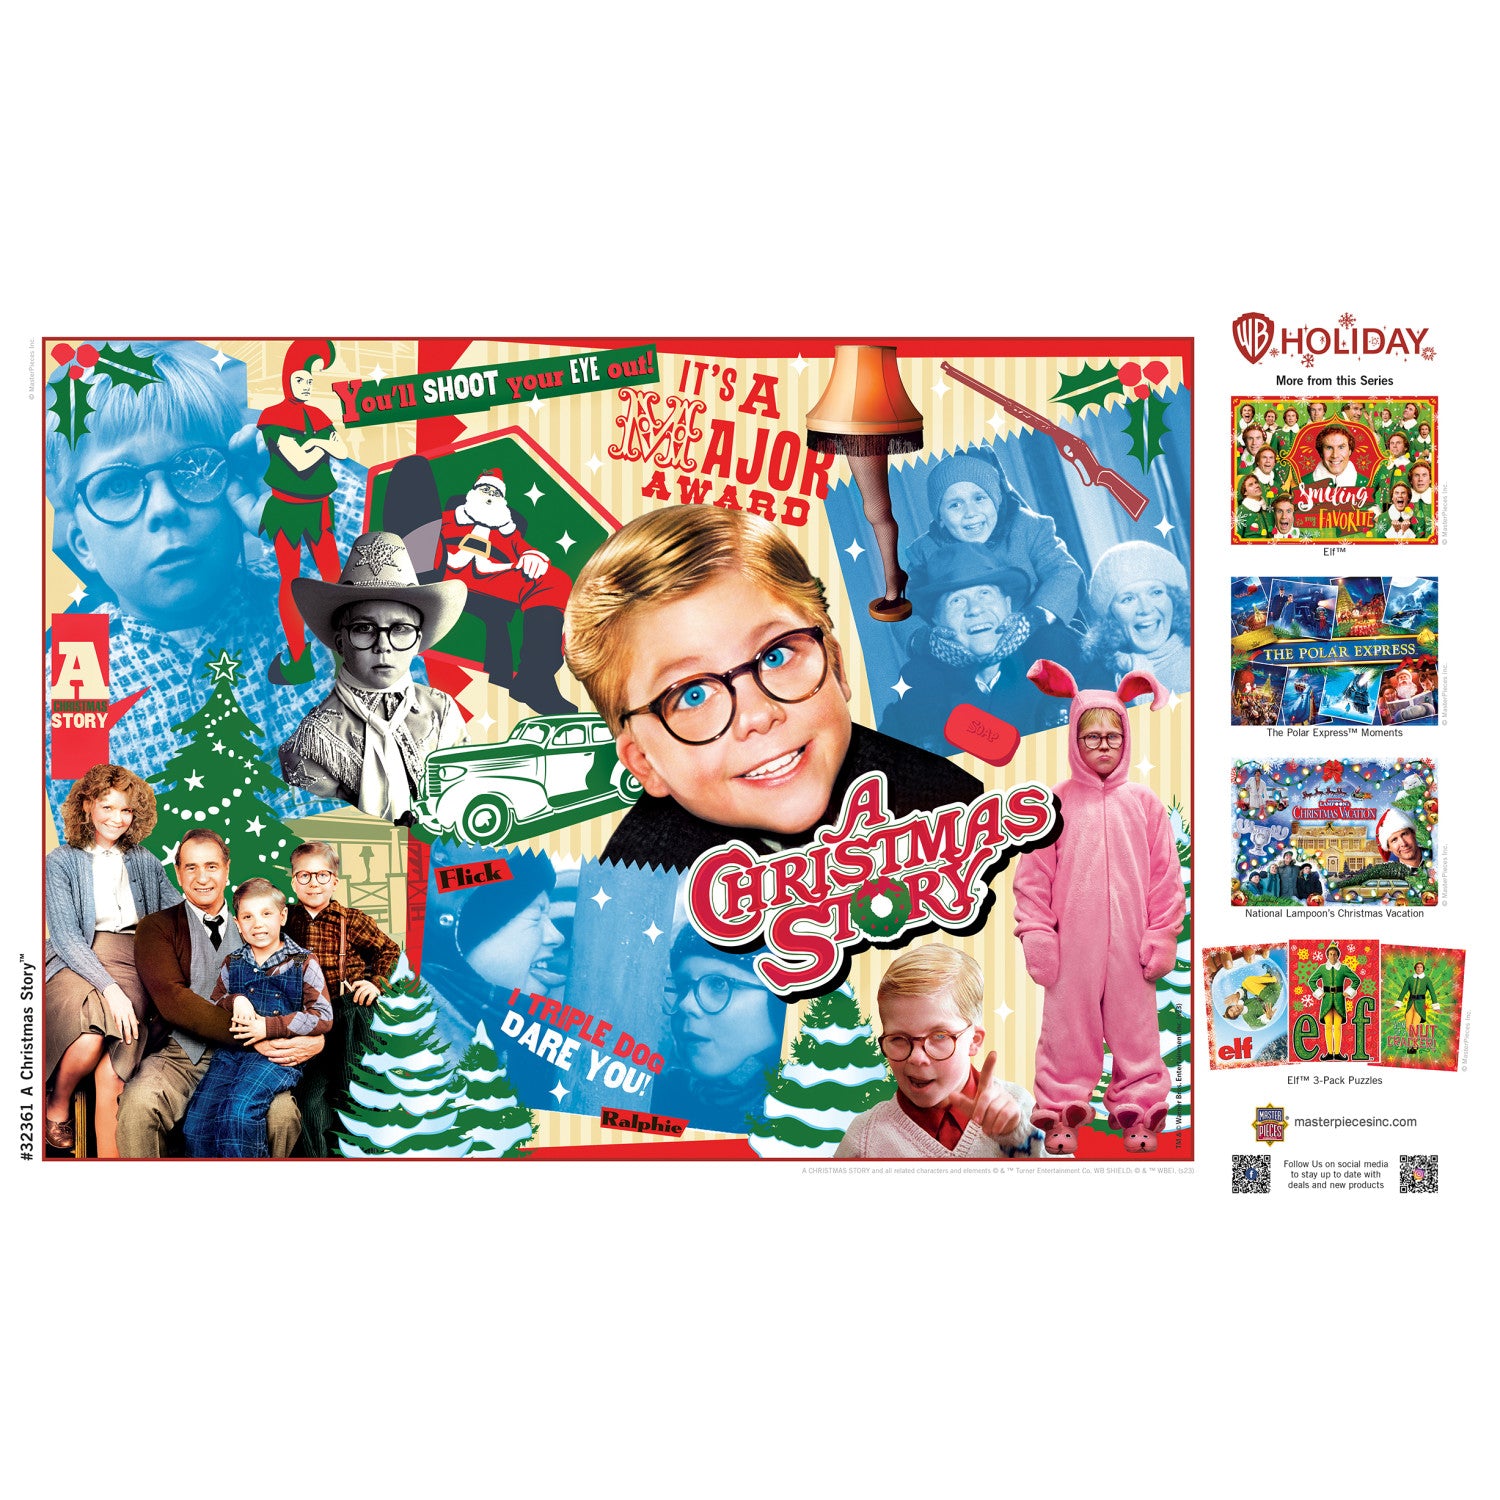 A Christmas Story - 500 Piece Jigsaw Puzzle